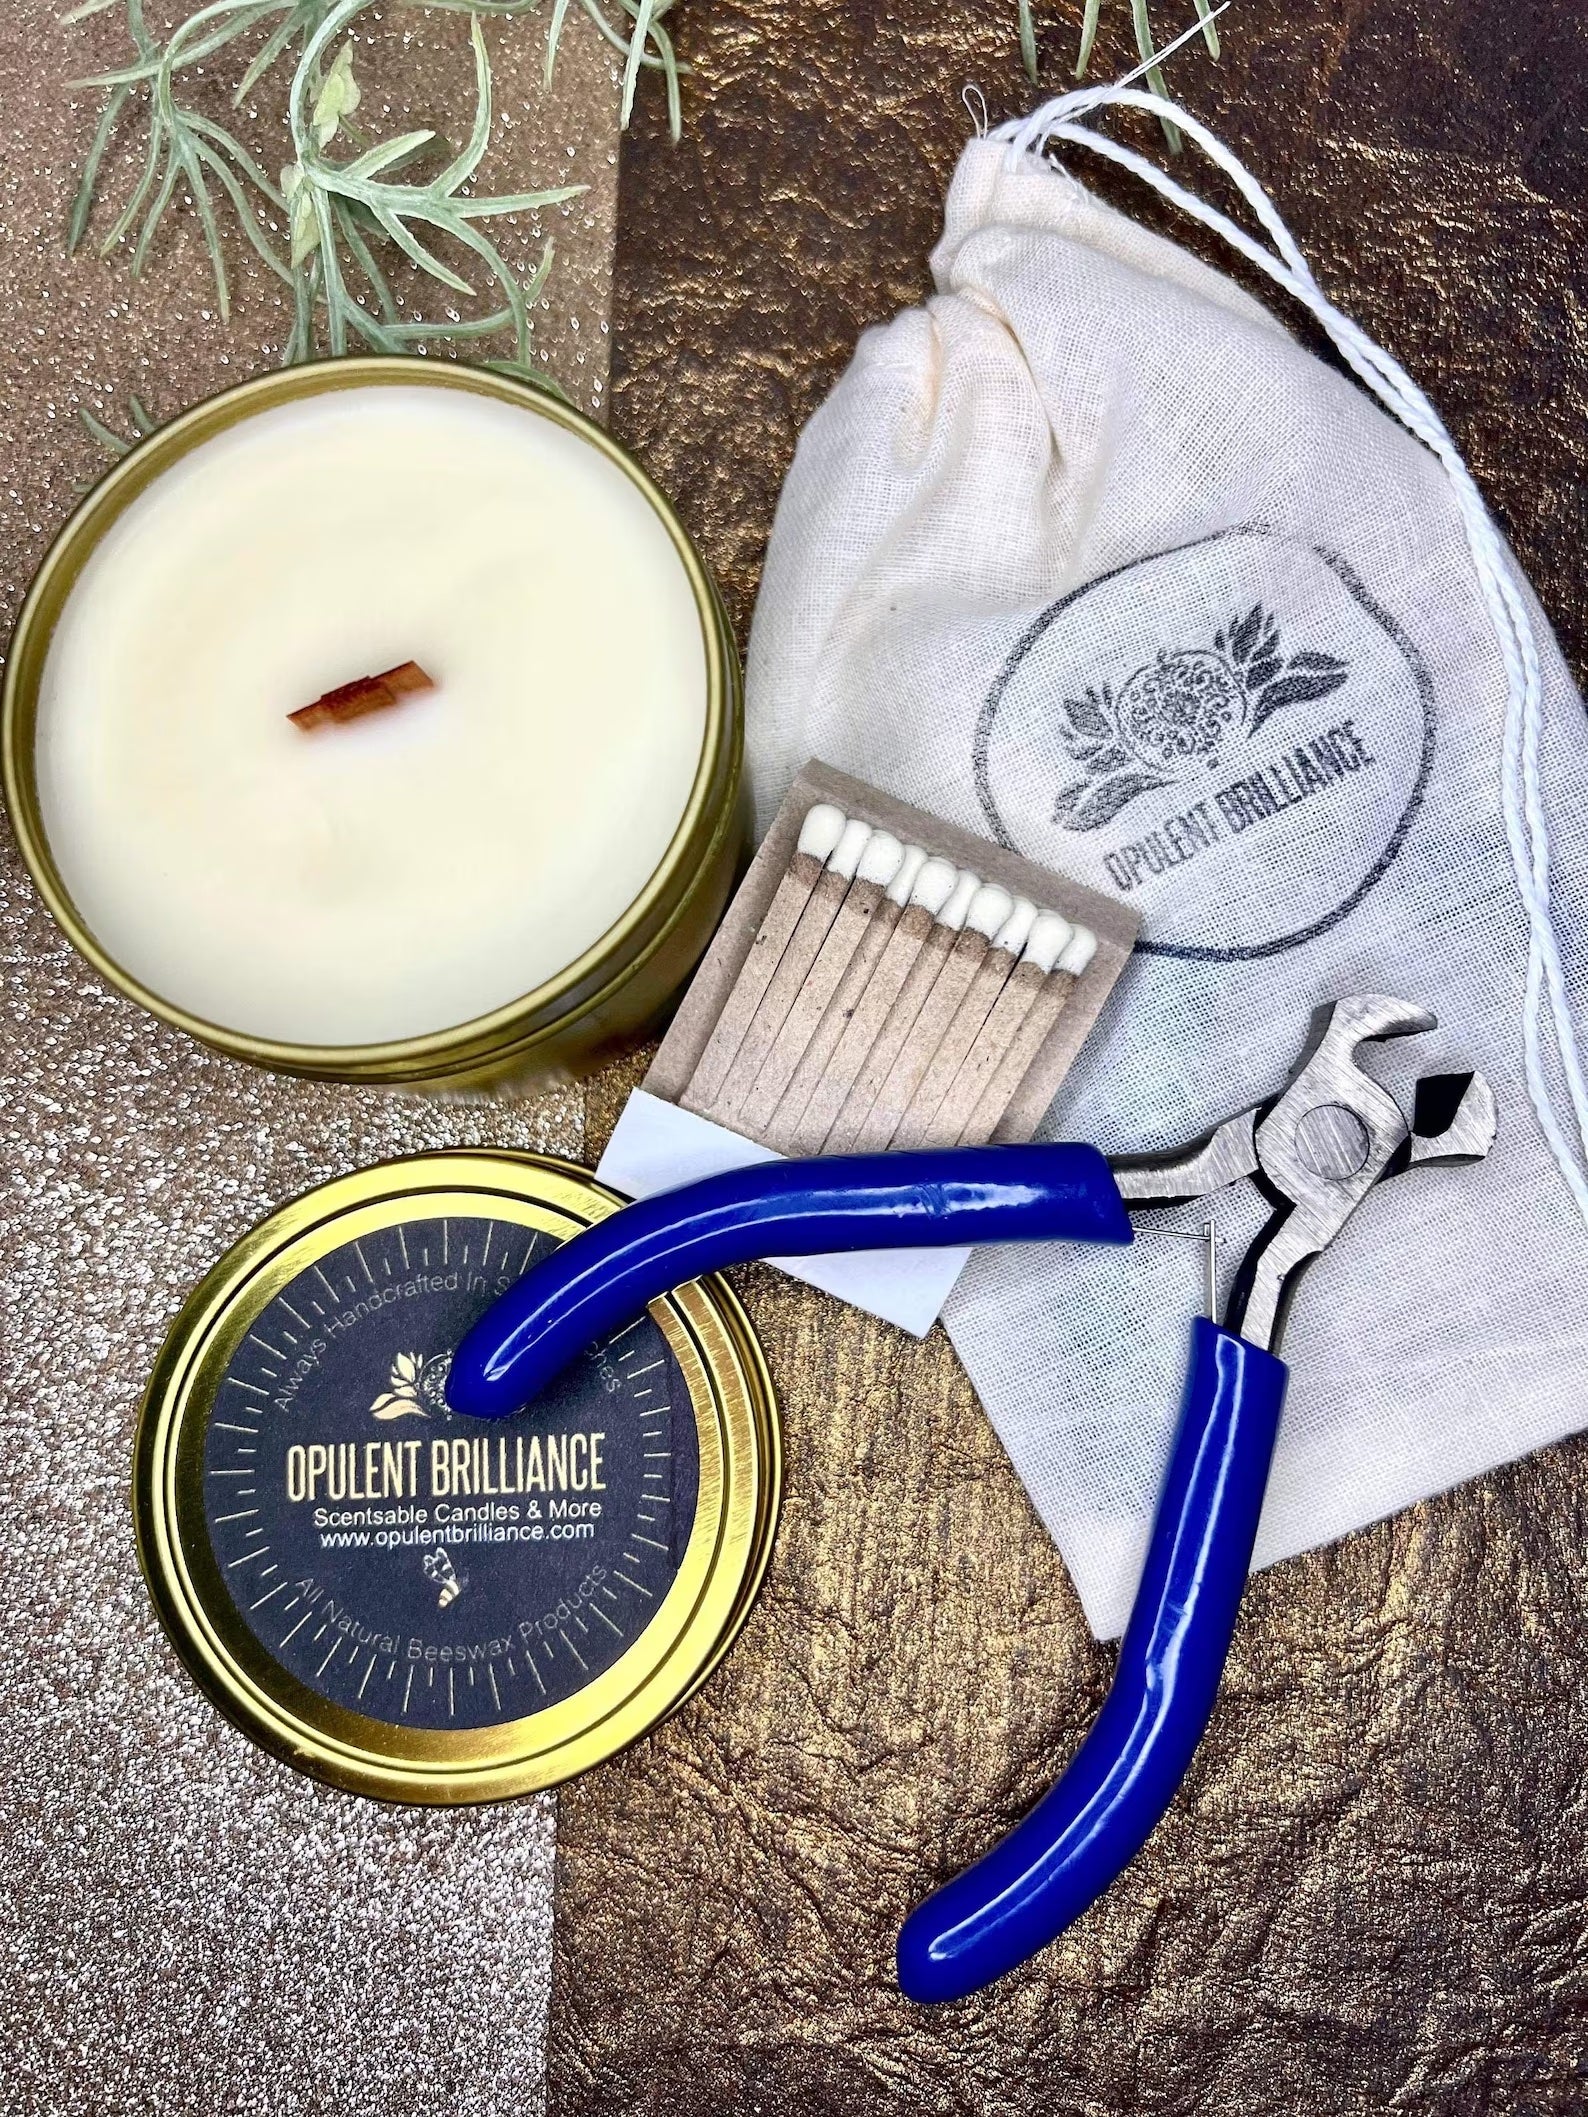 wood wick trimmer beeswax candle and matches 